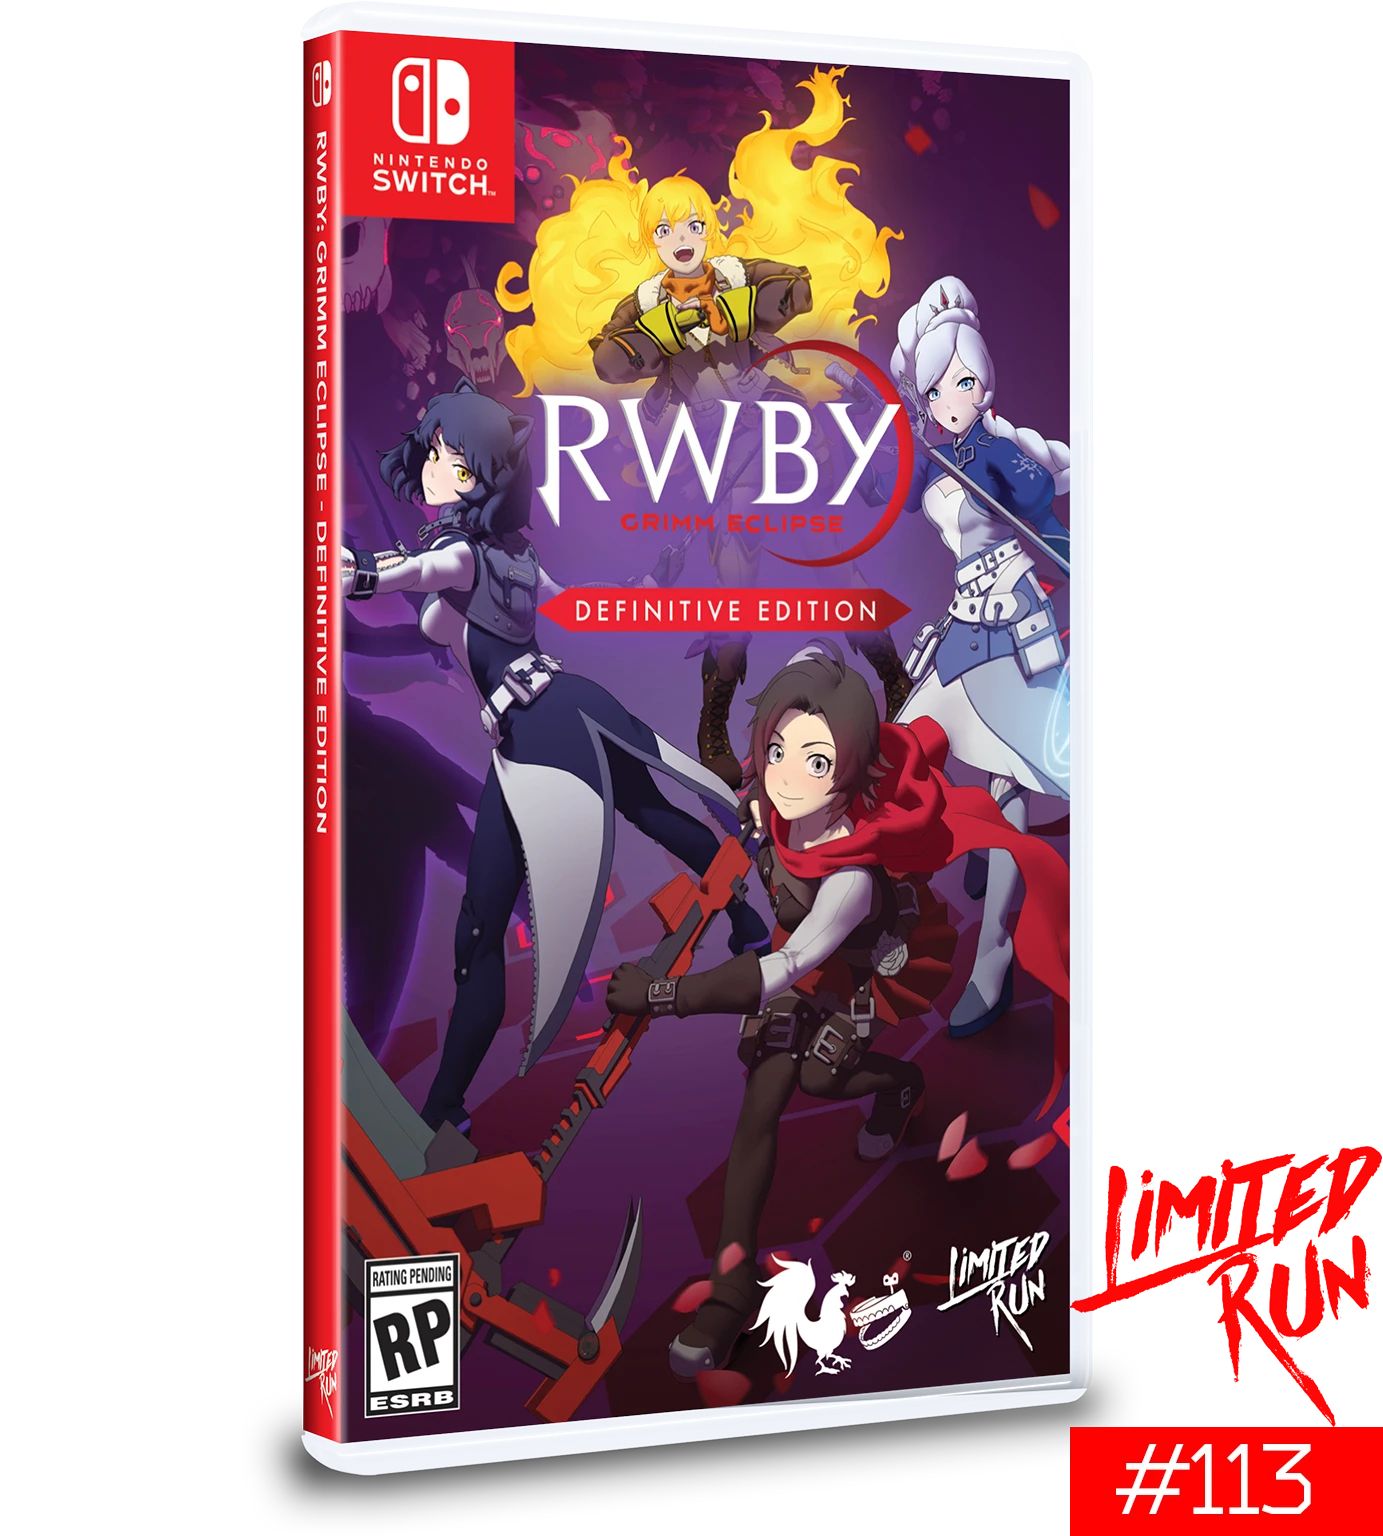 RWBY: Grimm Eclipse - Definitive Edition Gets Limited Run Physical Release